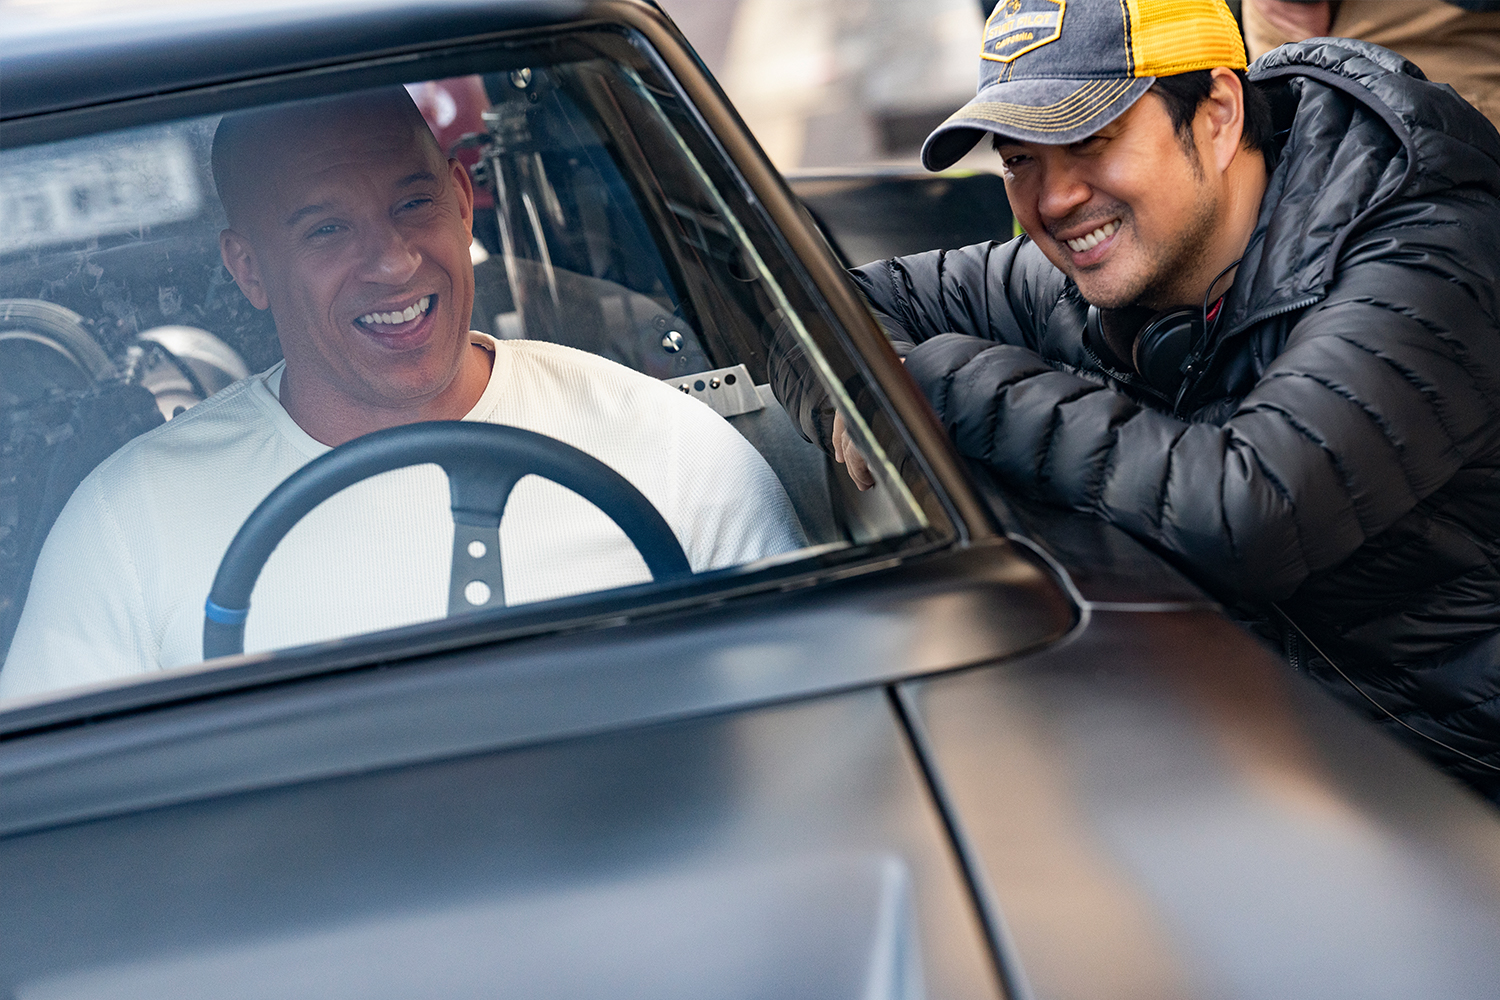 Vin Diesel as Dom and co-writer and director Justin Lin on the set of F9.